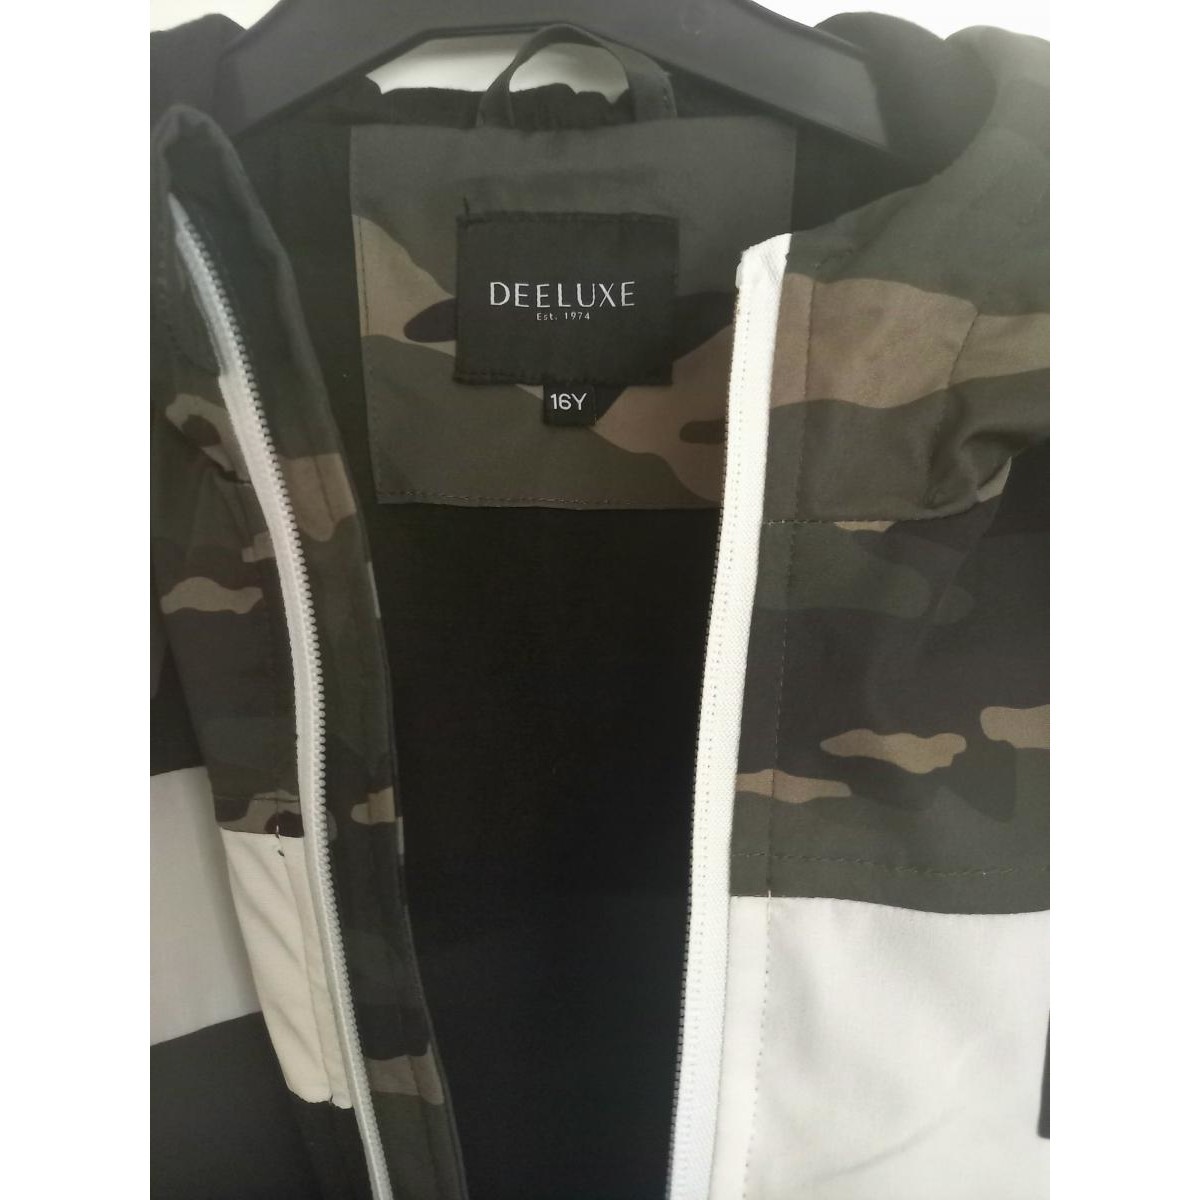 Deeluxe Multicolore Veste camouflage DELUXE Frizzy 16 ans 8KPVa4nh